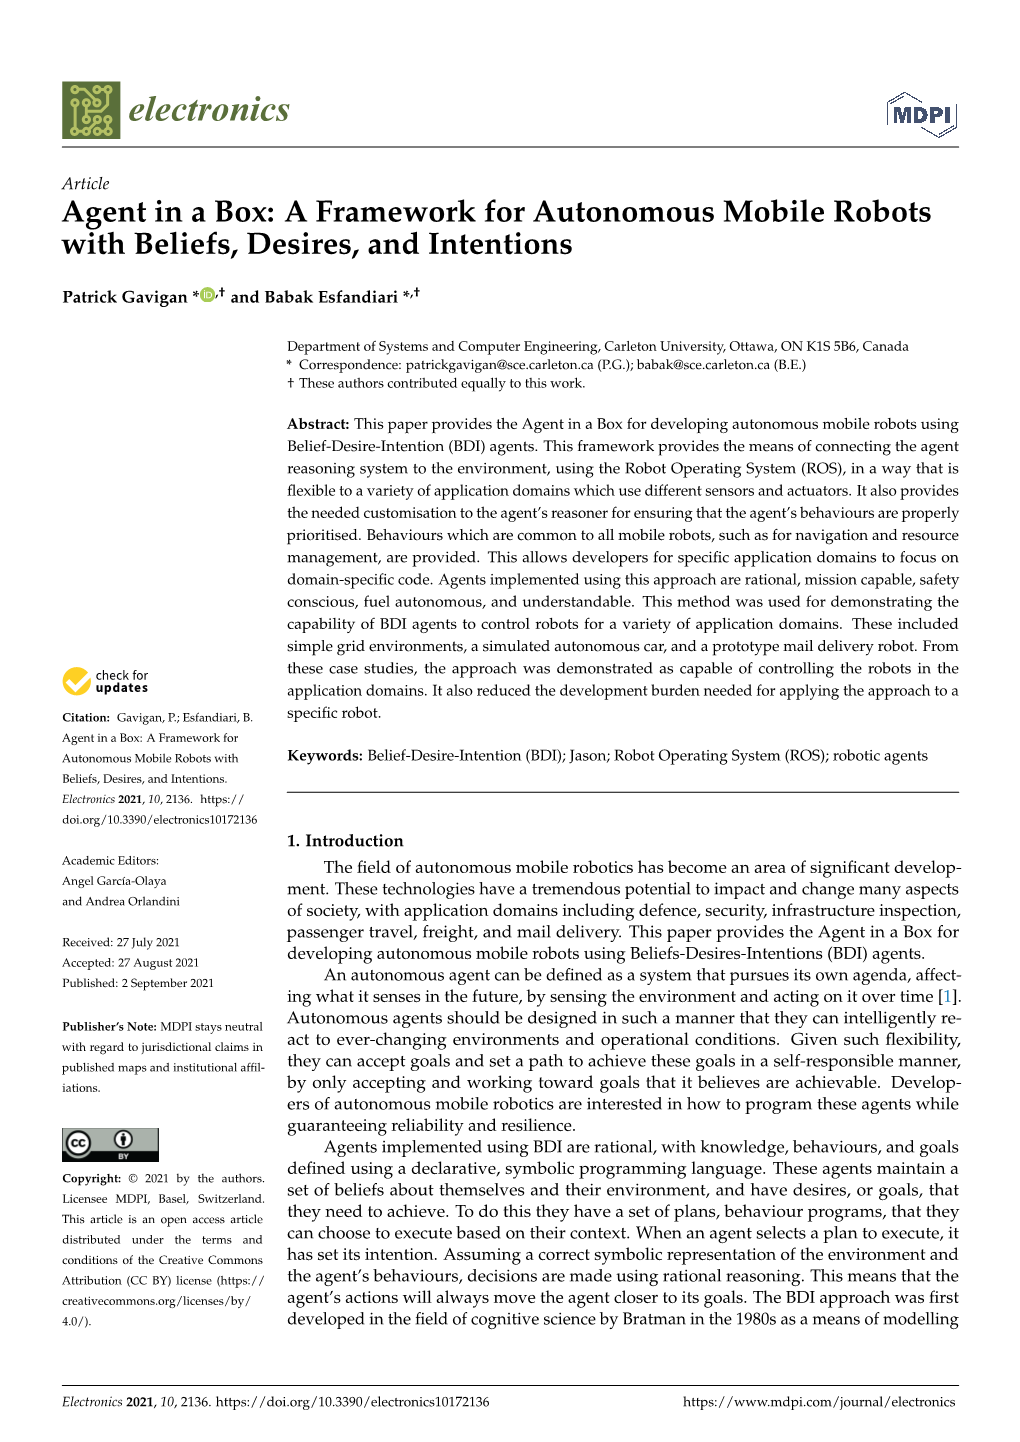 A Framework for Autonomous Mobile Robots with Beliefs, Desires, and Intentions